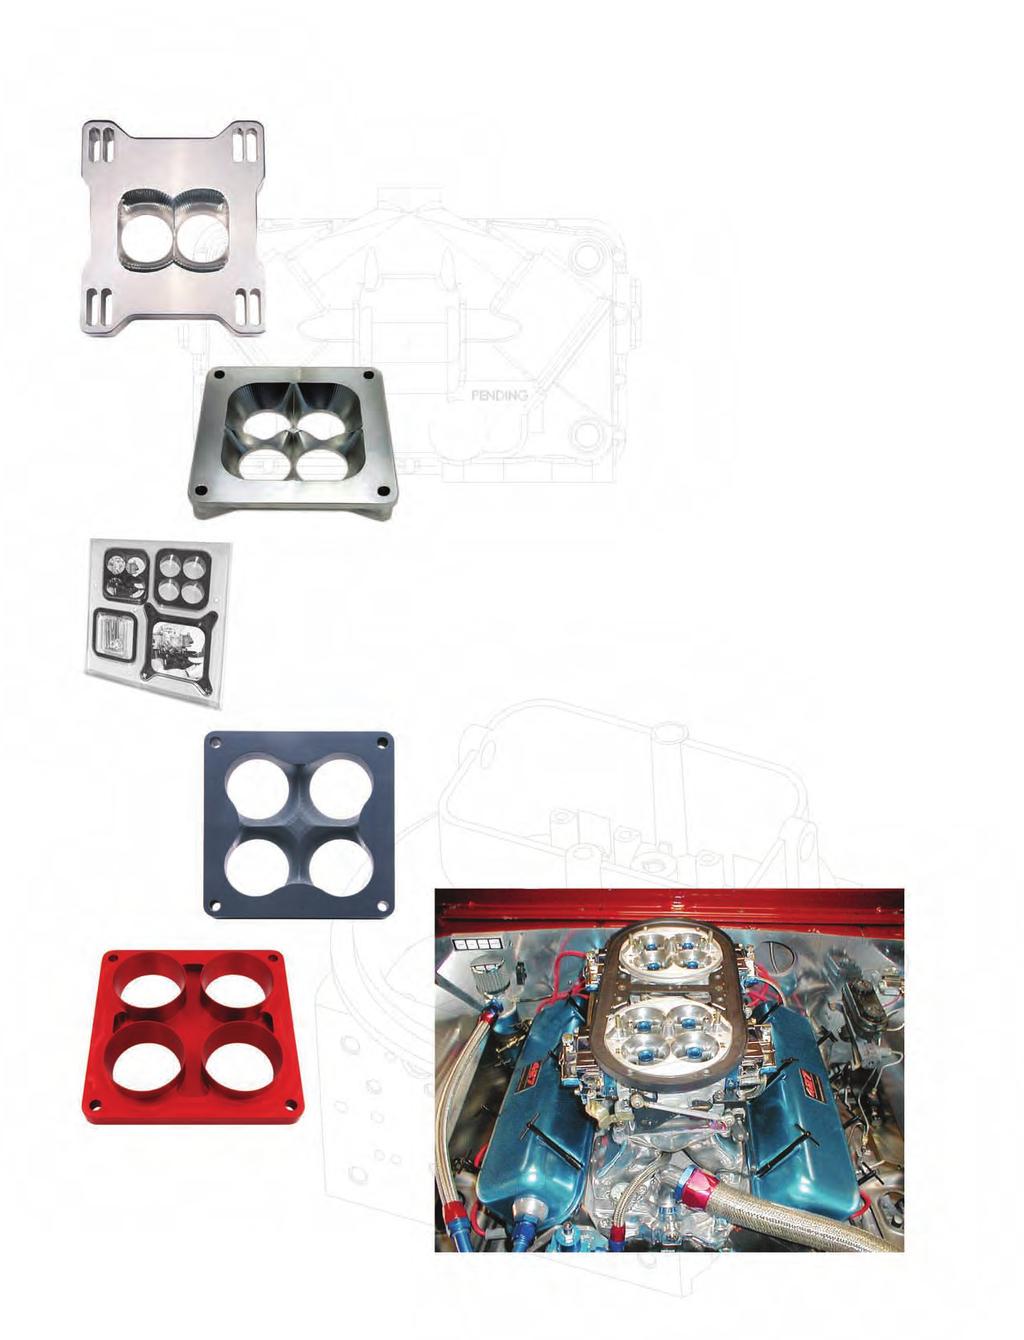 Specialty Parts & Tools Transition Blend Carburetor Spacers Common knowledge and experience tells us that open spacers help top-end power and four-hole spacers help mid-range power.